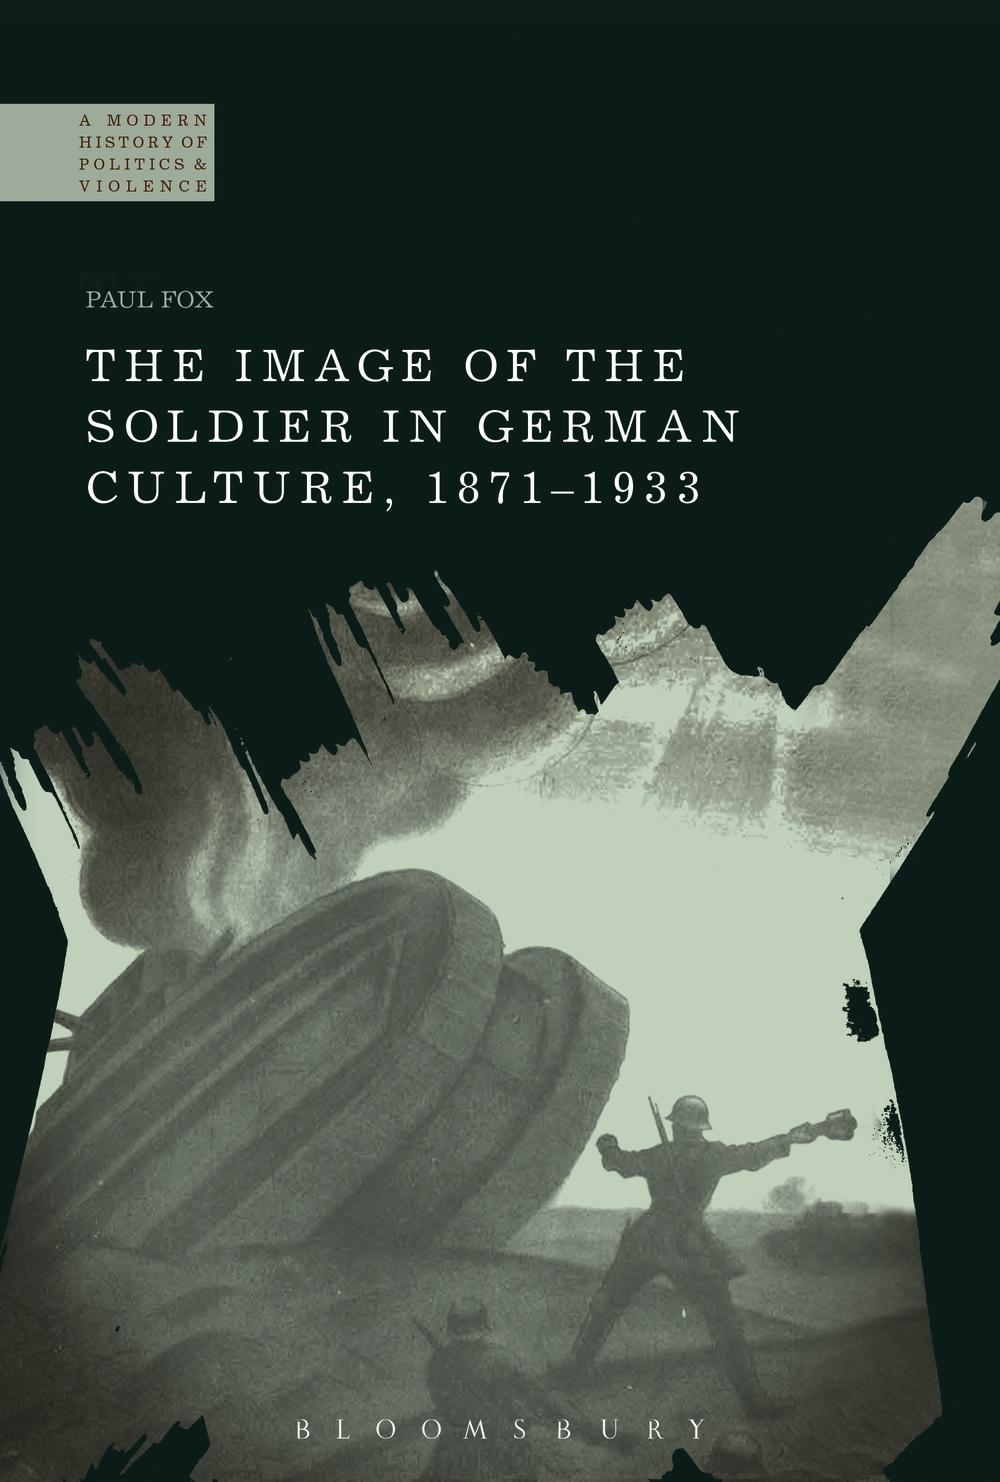 Image of the Soldier in German Culture, 1871-1933 - Paul Fox